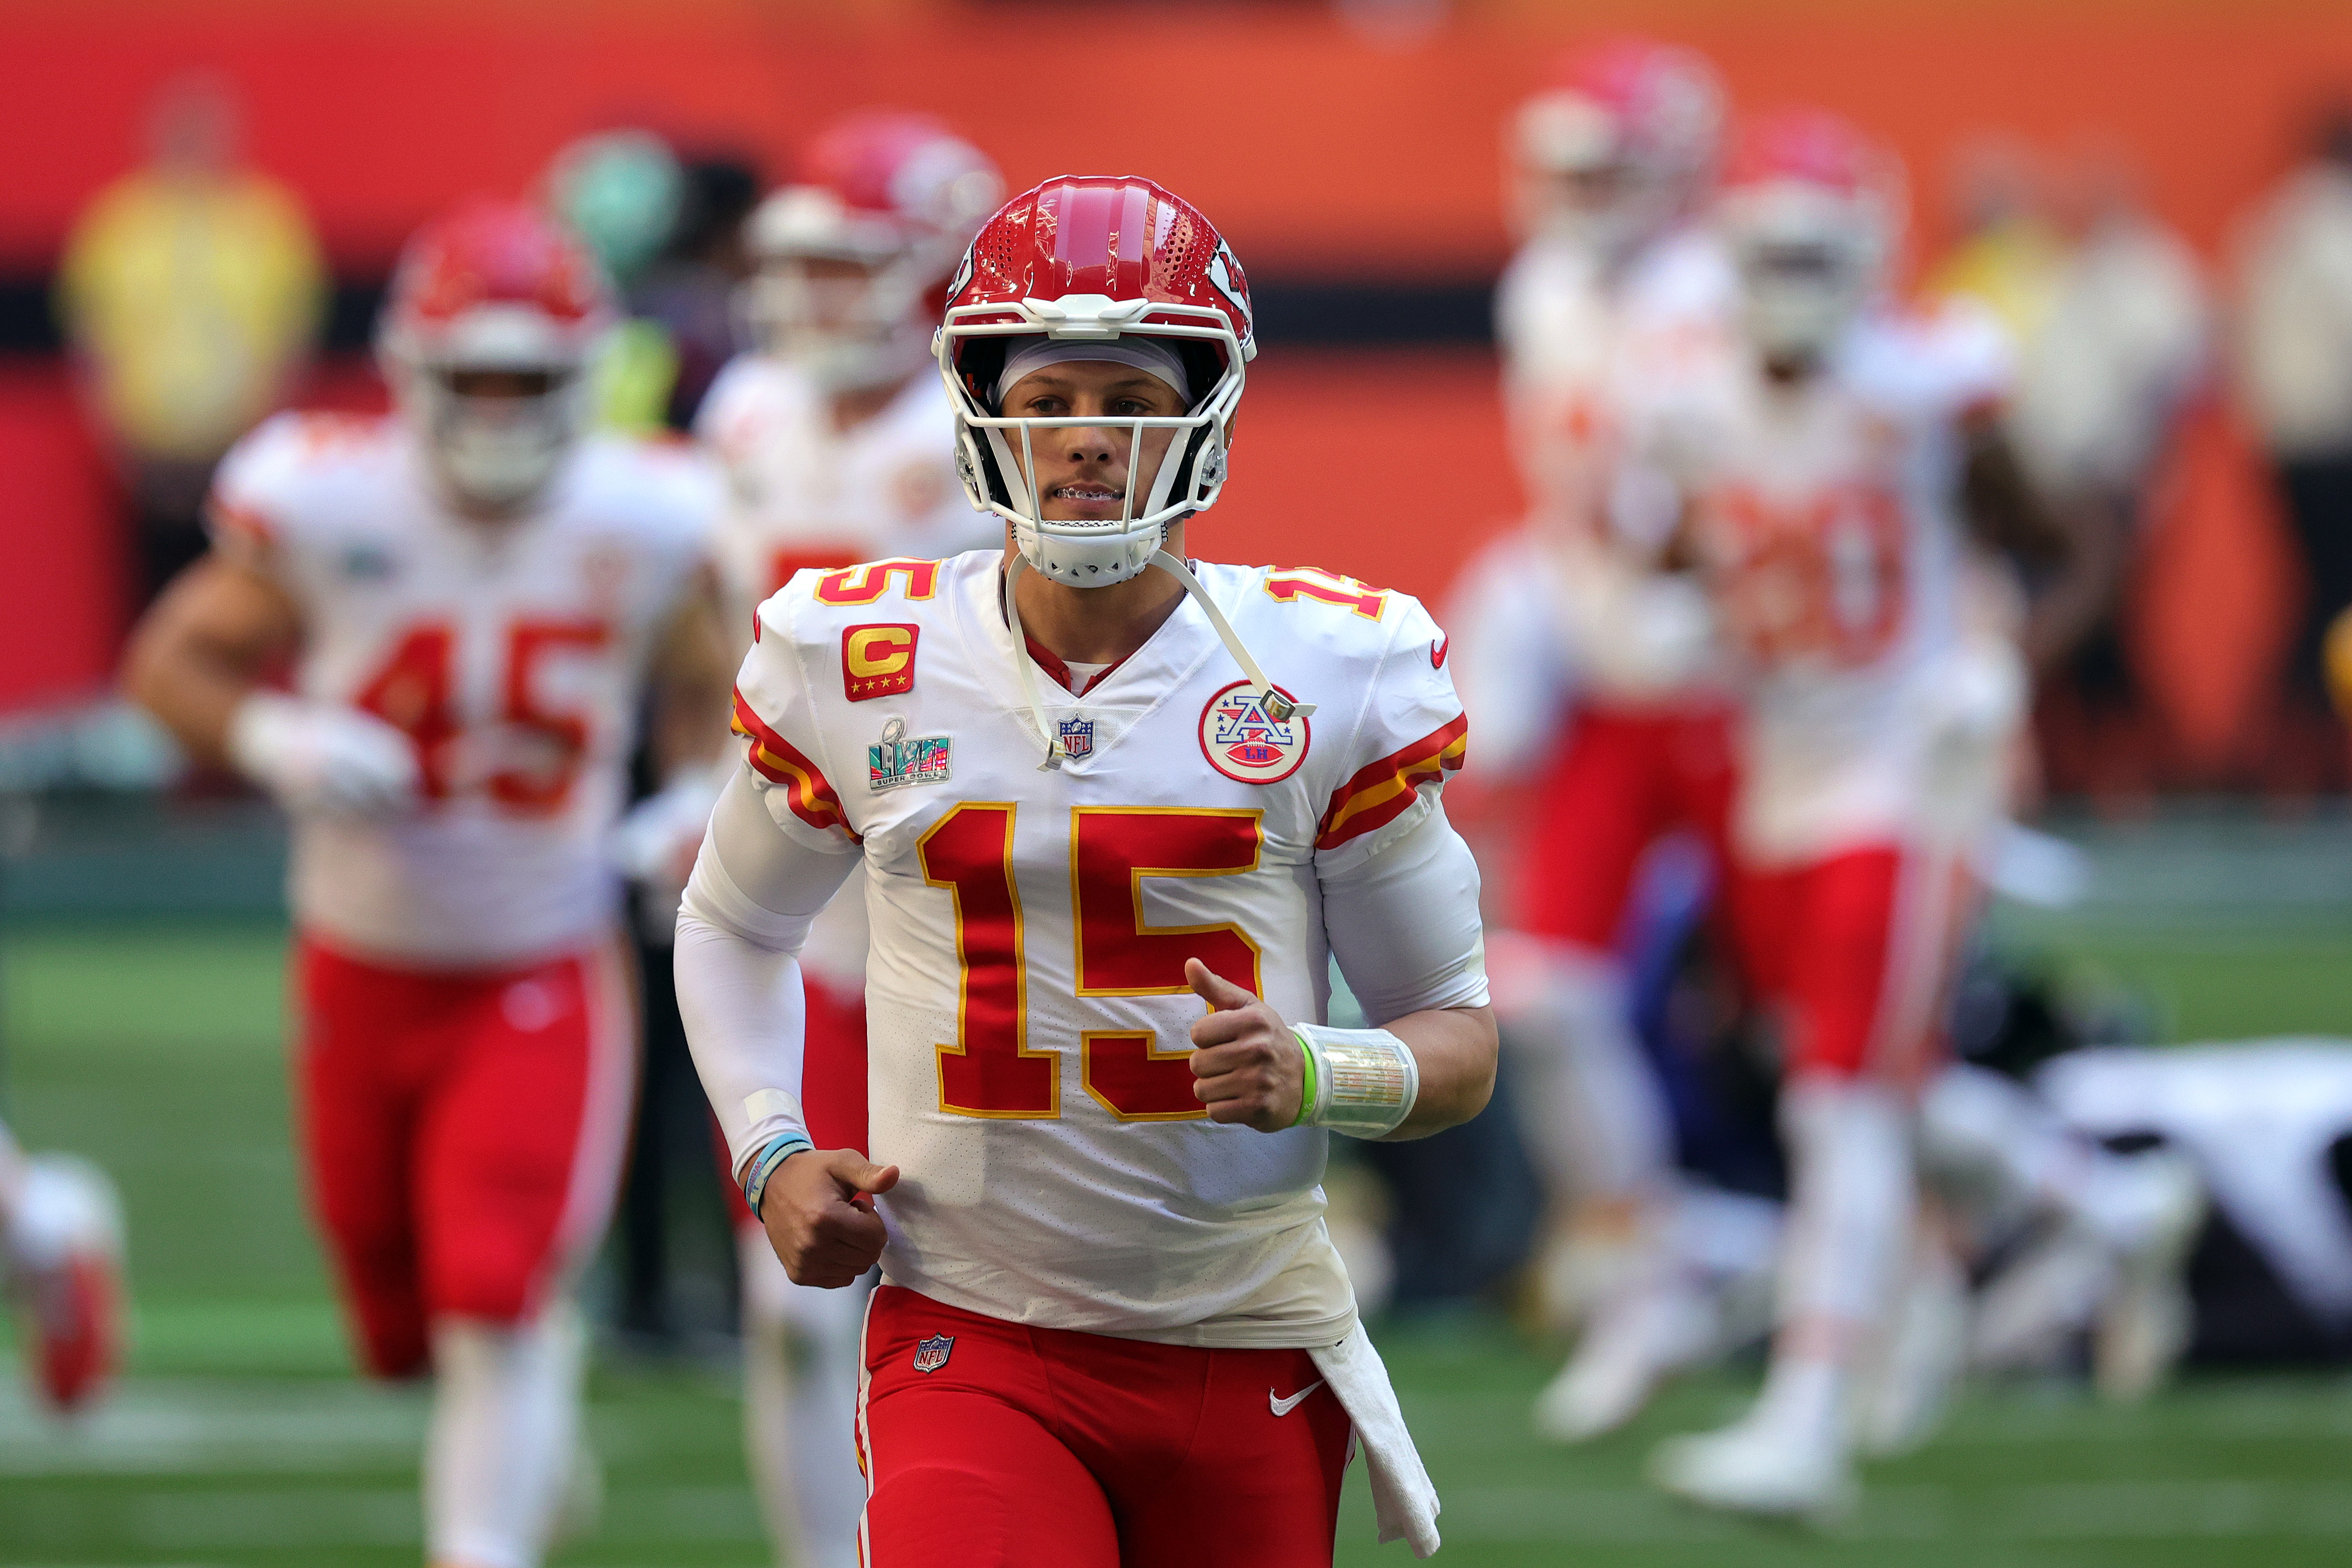 Patrick Mahomes #15 of the Kansas City Chiefs runs onto the field before playing against the Philadelphia Eagles in Super Bowl LVII at State Farm Stadium on February 12, 2023 in Glendale, Arizona.